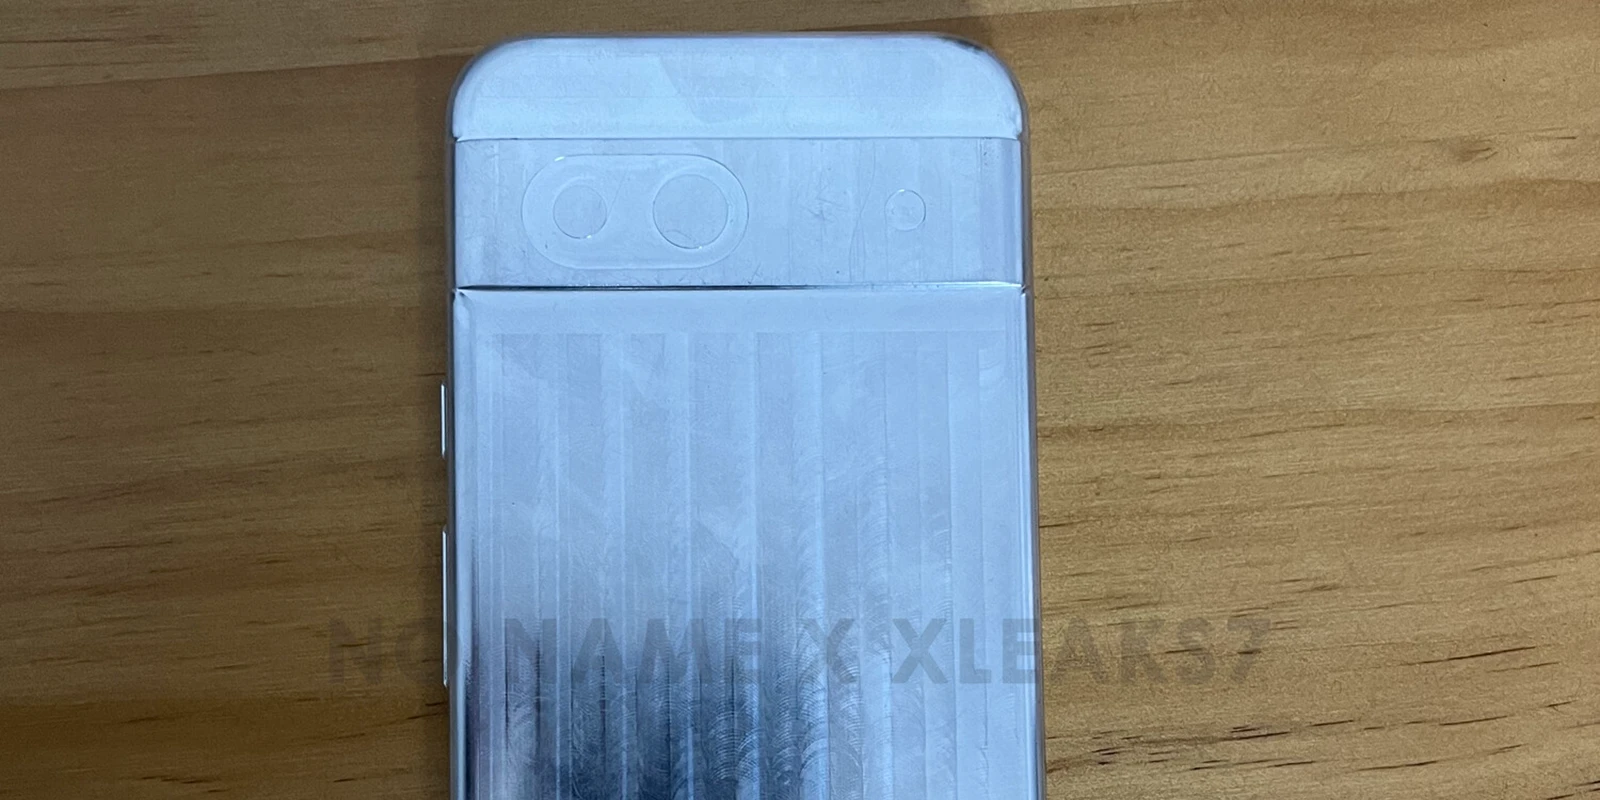 Another Pixel 8a leaks, but this time it's aluminum dummy photos